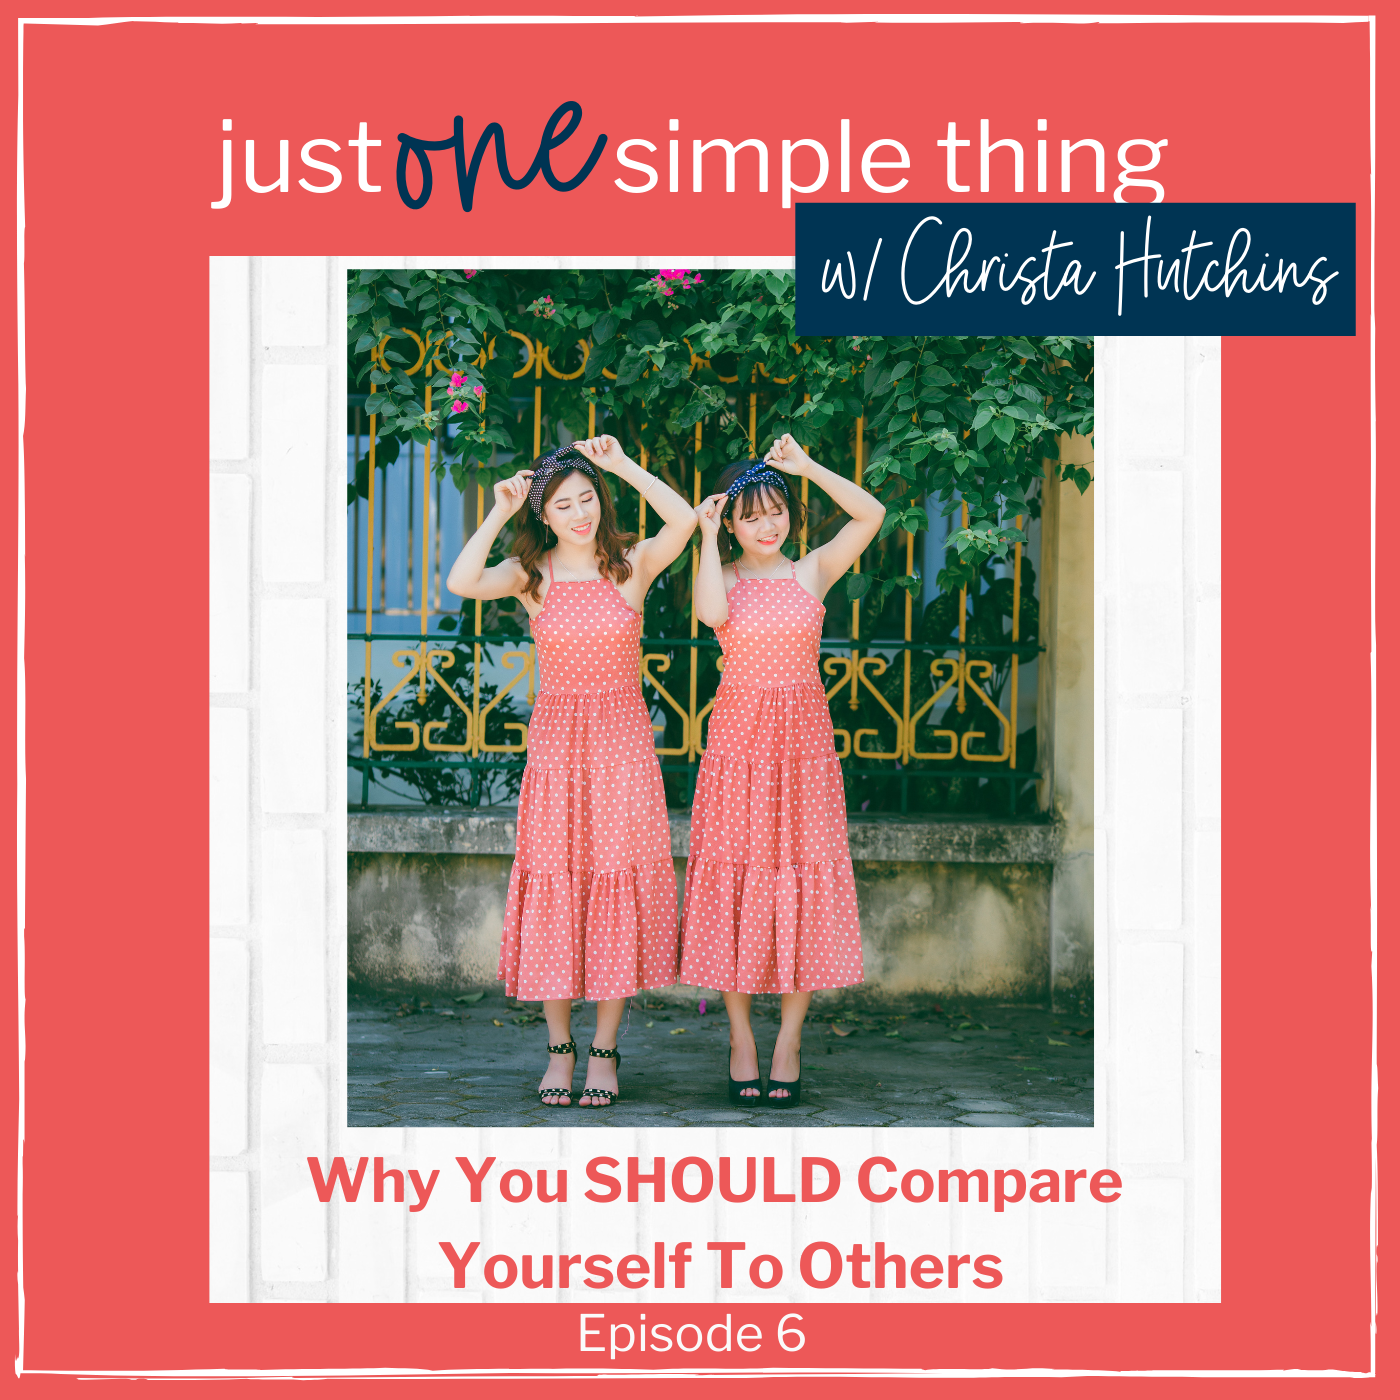 Why You SHOULD Compare Yourself to Others